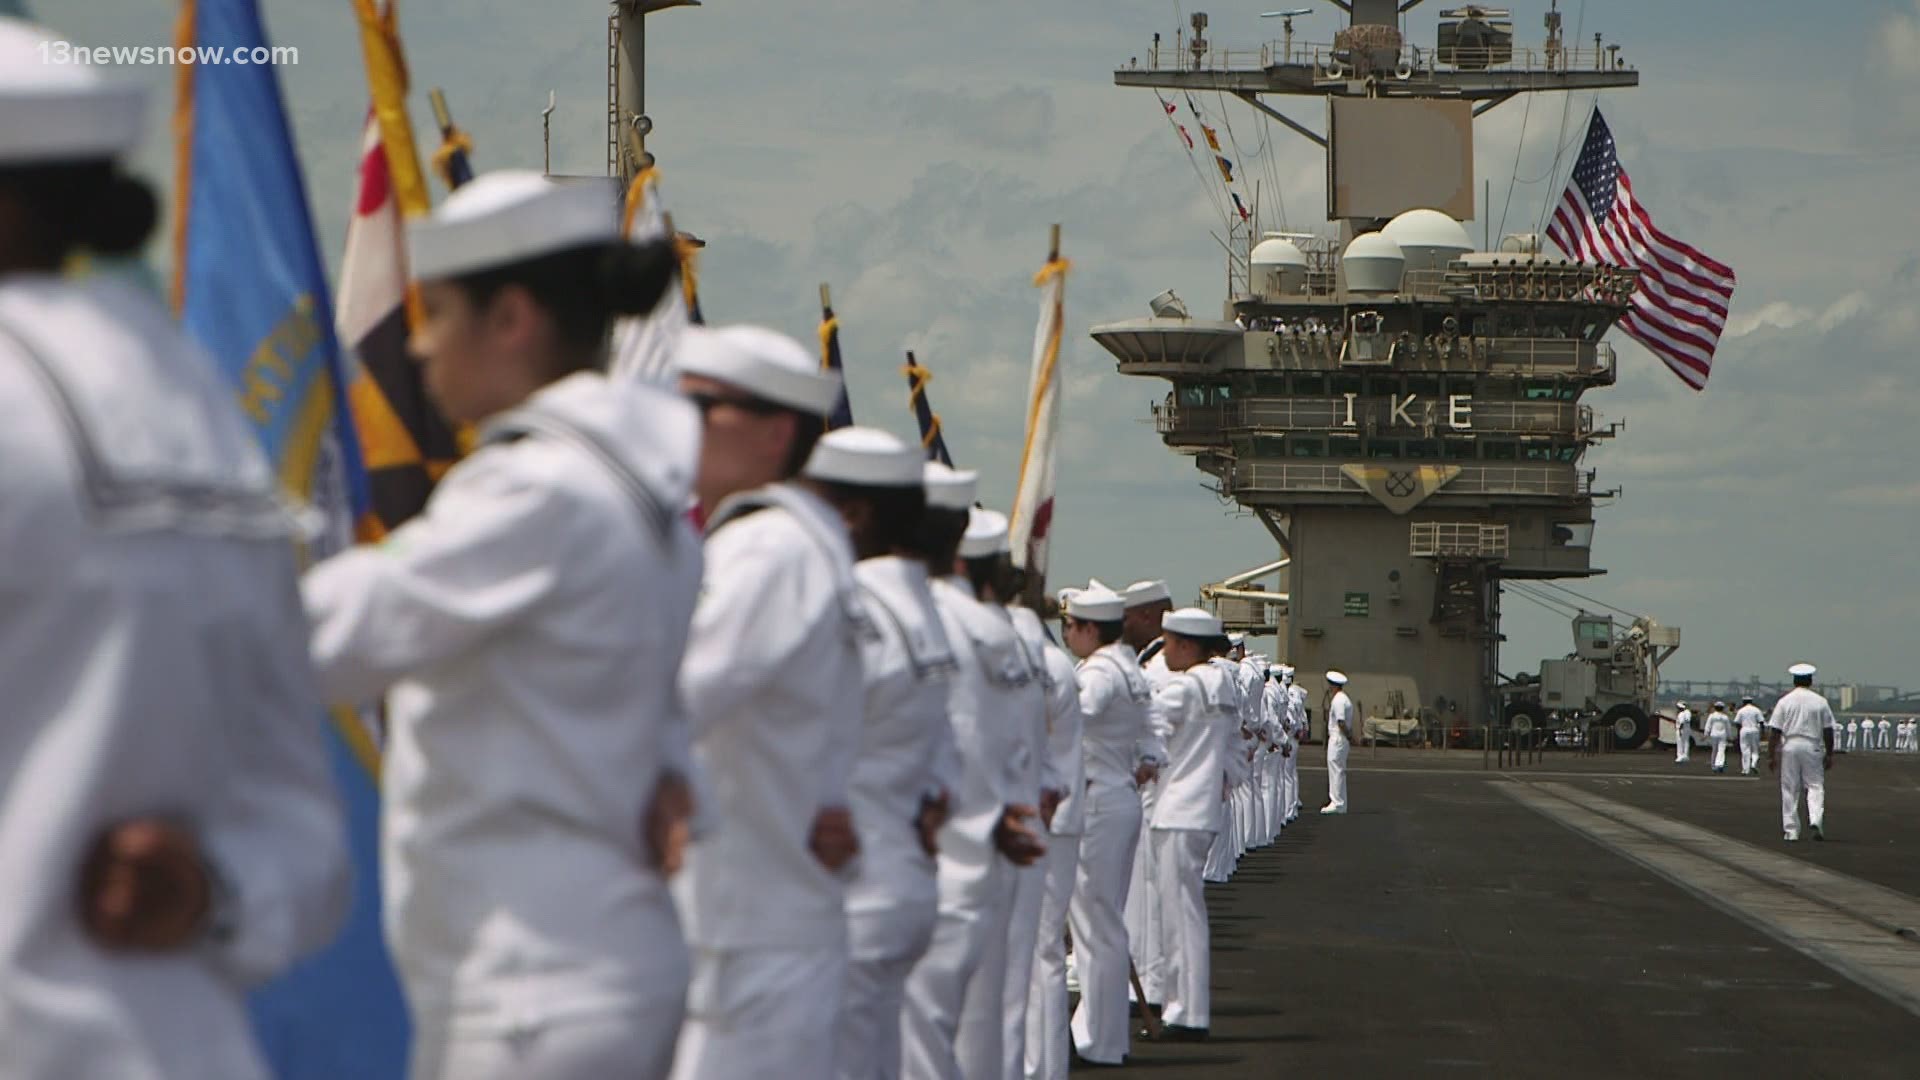 The USS Dwight D. Eisenhower returned to its homeport in Norfolk after going on its second deployment in a year.